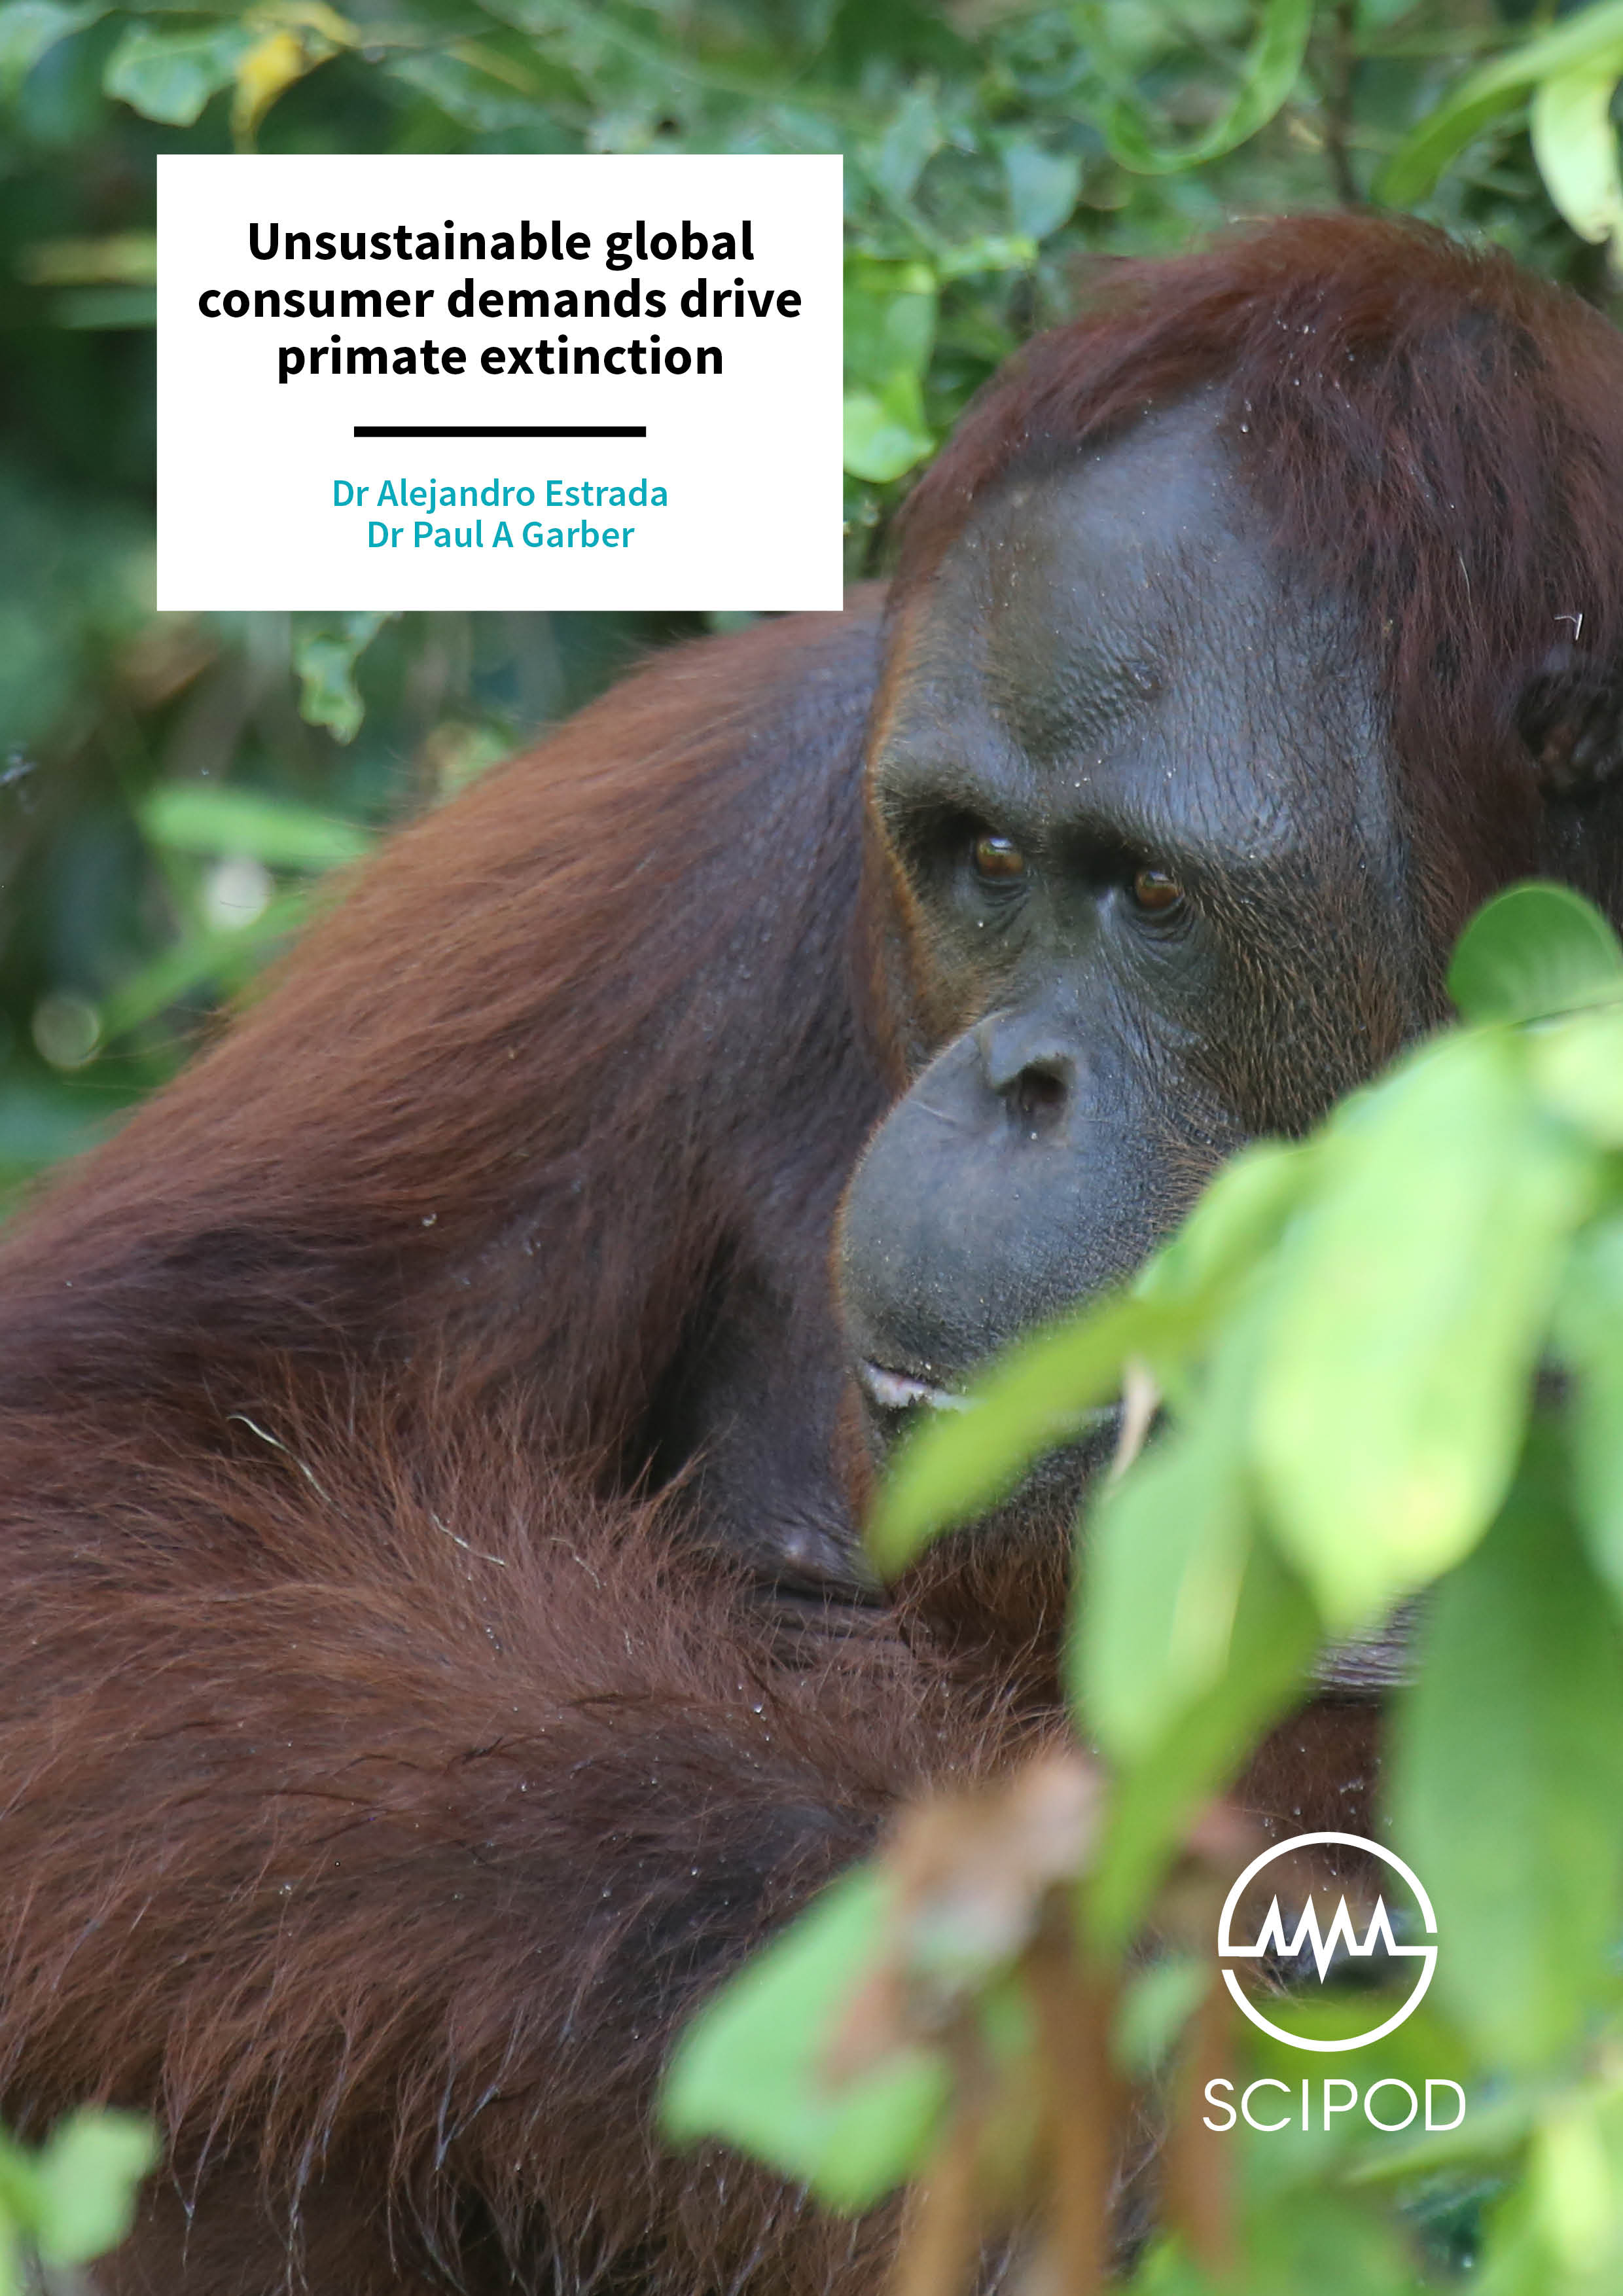 Unsustainable global consumer demands drive primate extinction – Dr Alejandro Estrada and Dr Paul A Garber